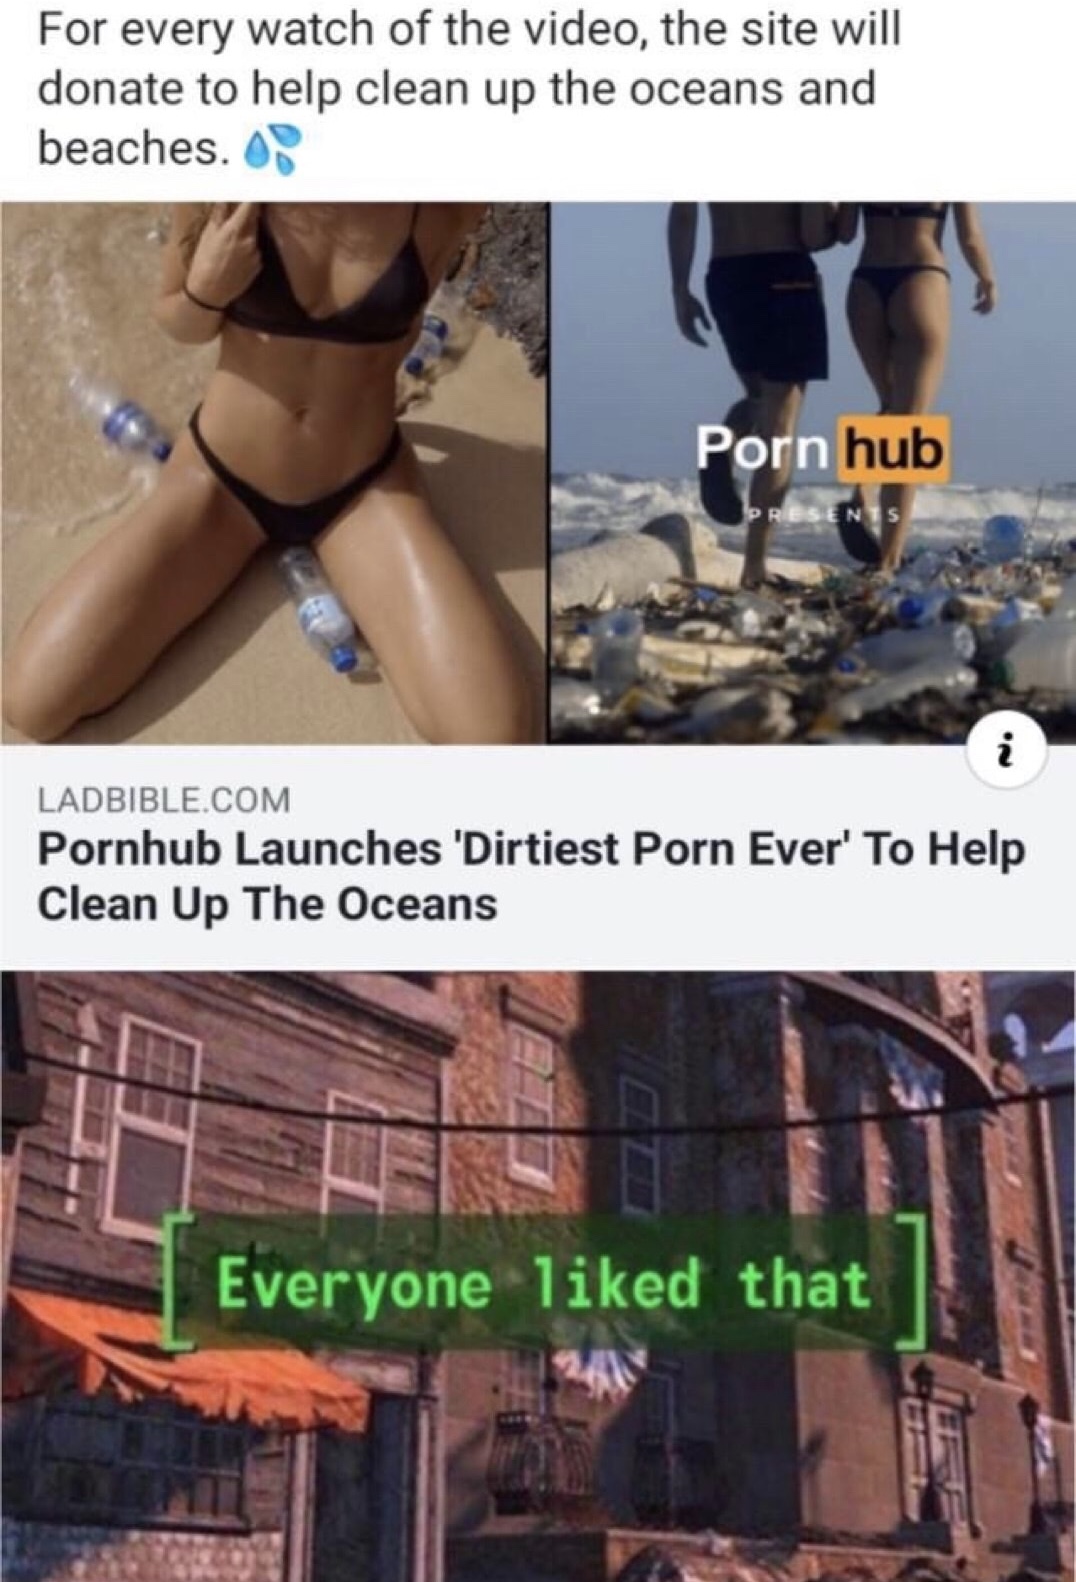 4th of july tactical memes - For every watch of the video, the site will donate to help clean up the oceans and beaches. Os Porn hub Presents Ladbible.Com Pornhub Launches 'Dirtiest Porn Ever' To Help Clean Up The Oceans Everyone d that